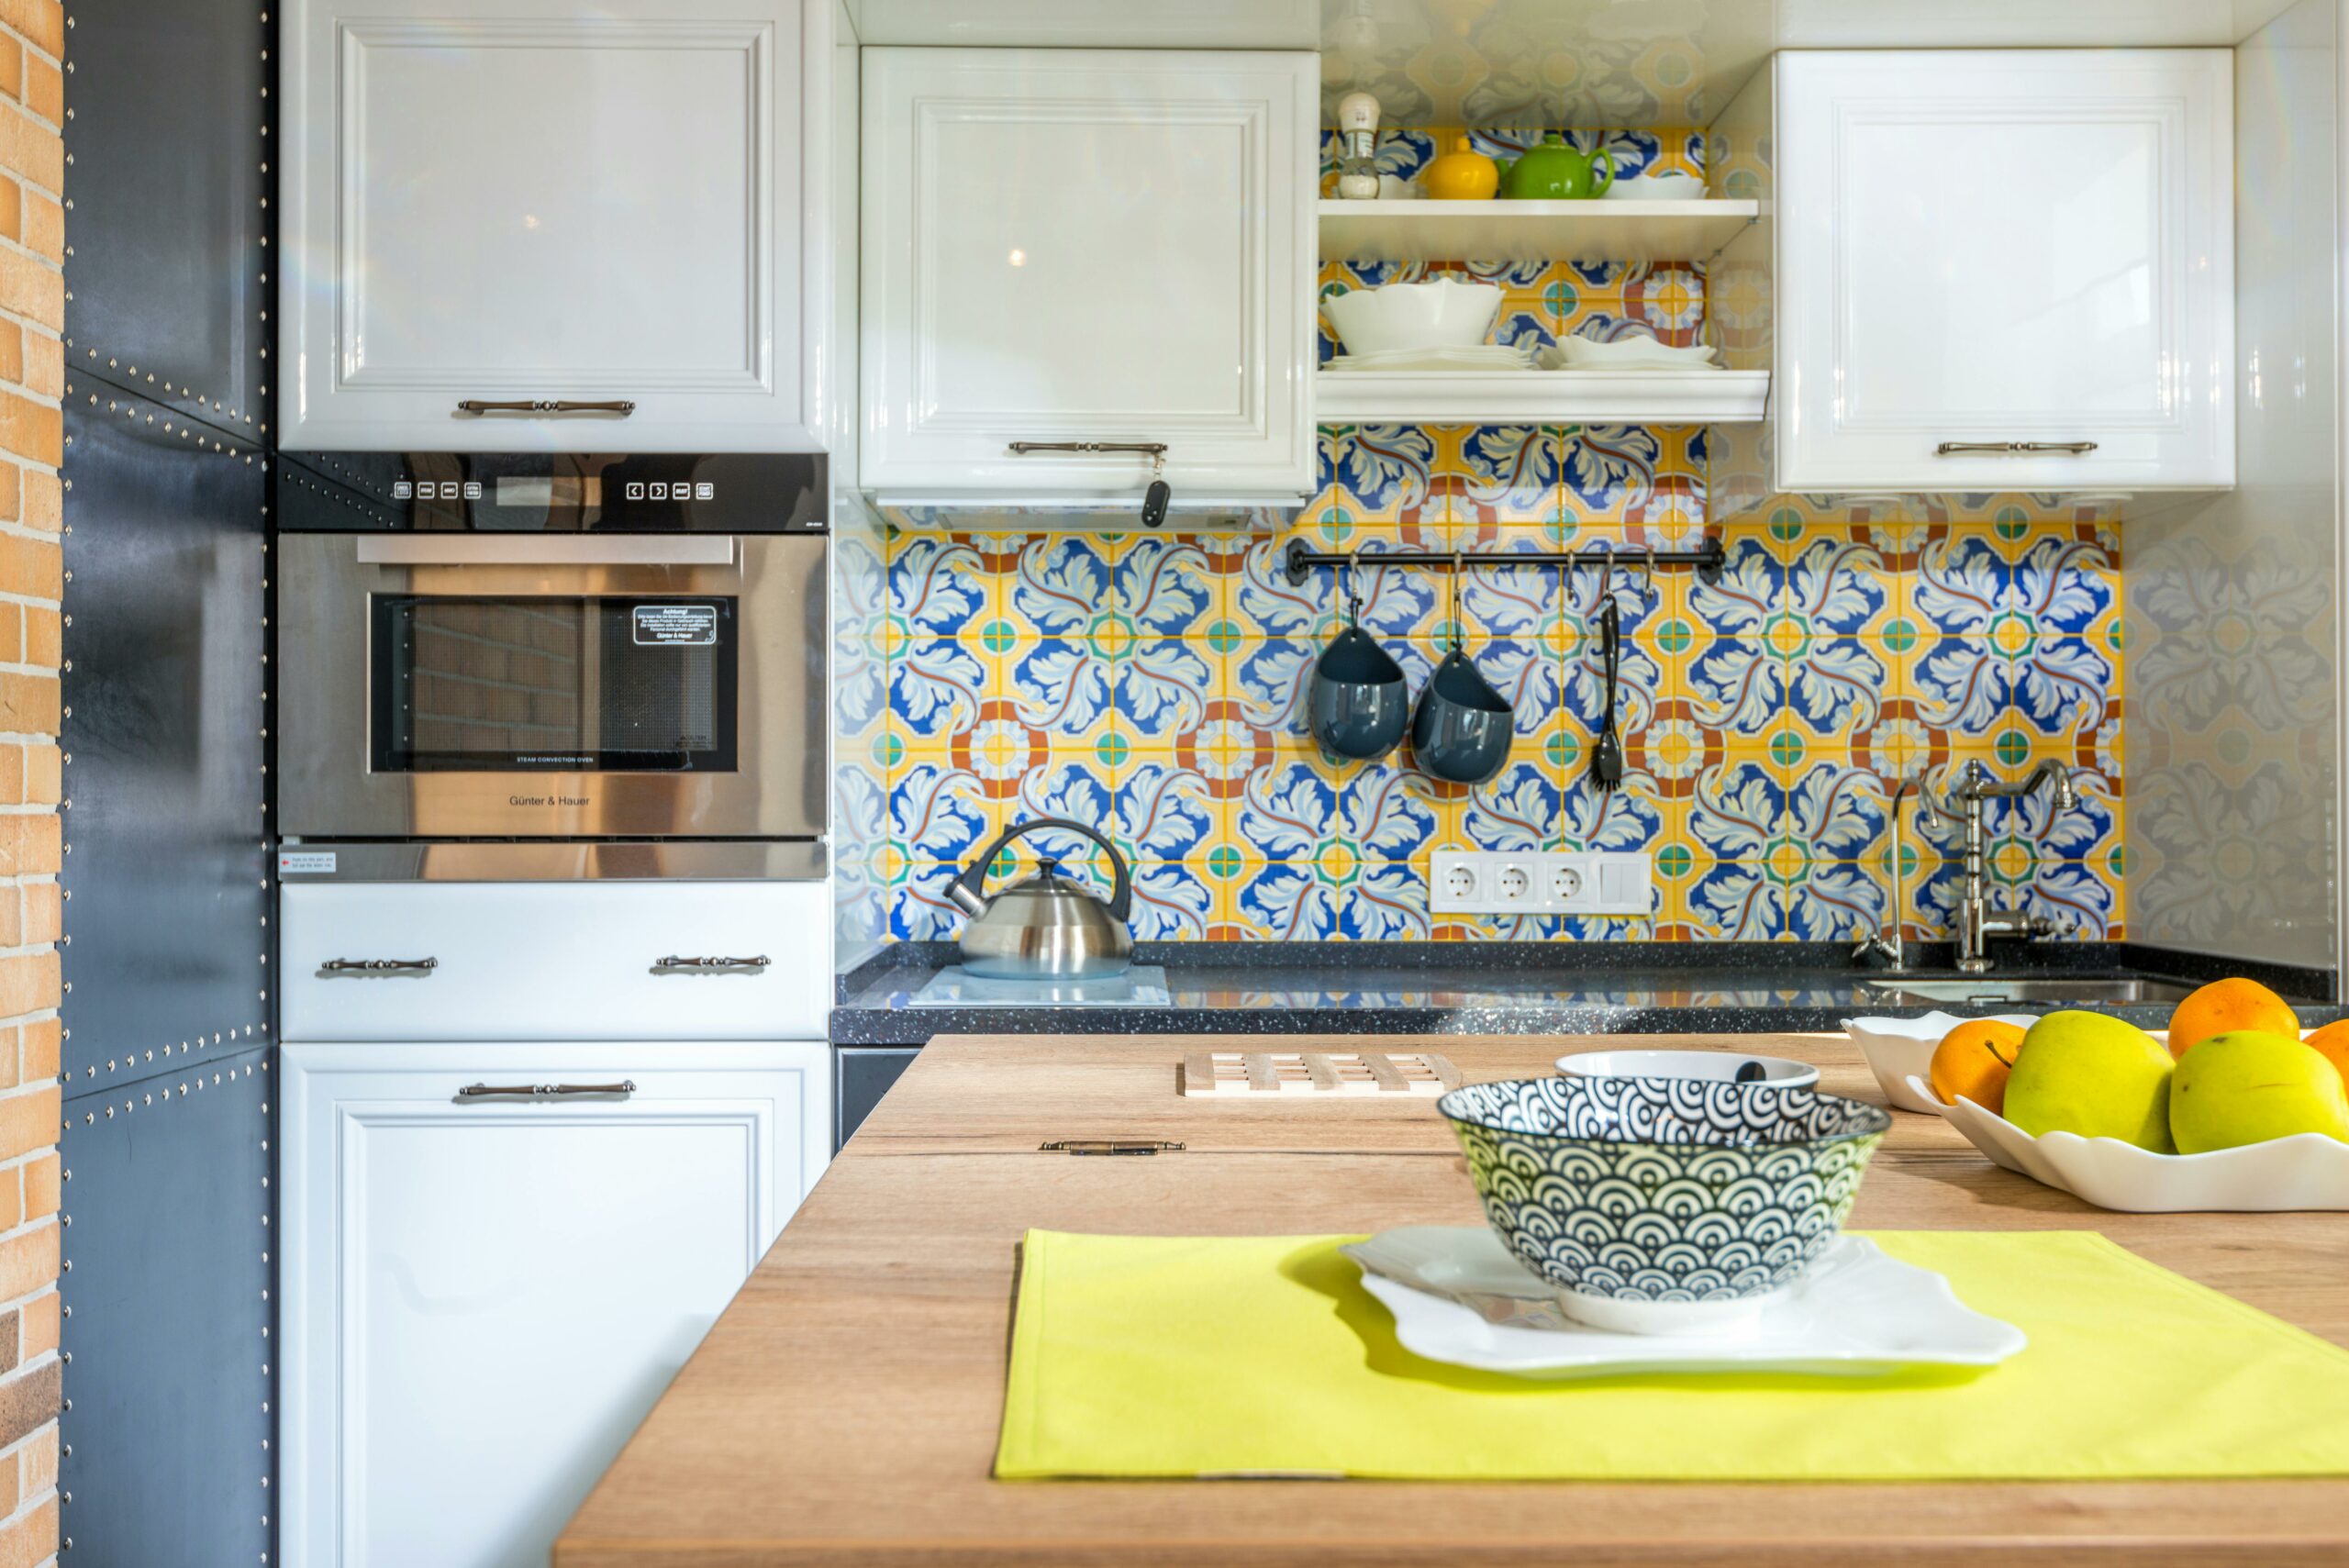 How To Avoid Corner Cabinets In Kitchen